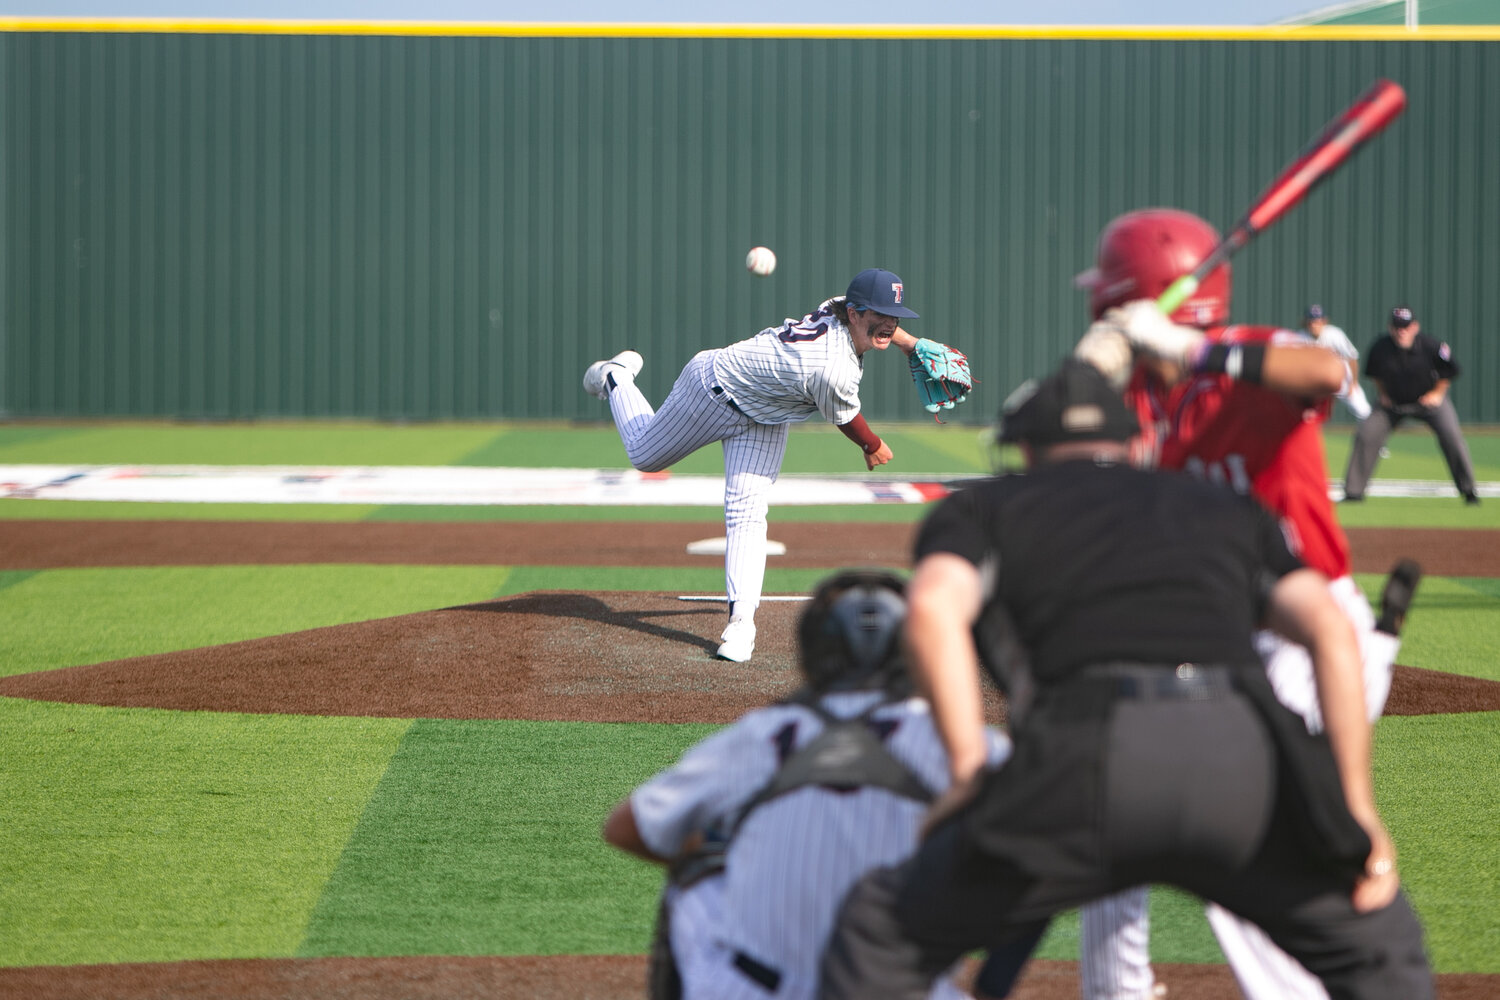 Gavin Brewer pitches during Saturday's Regional Quarterfinal between Katy and Tompkins at Cy-Springs.